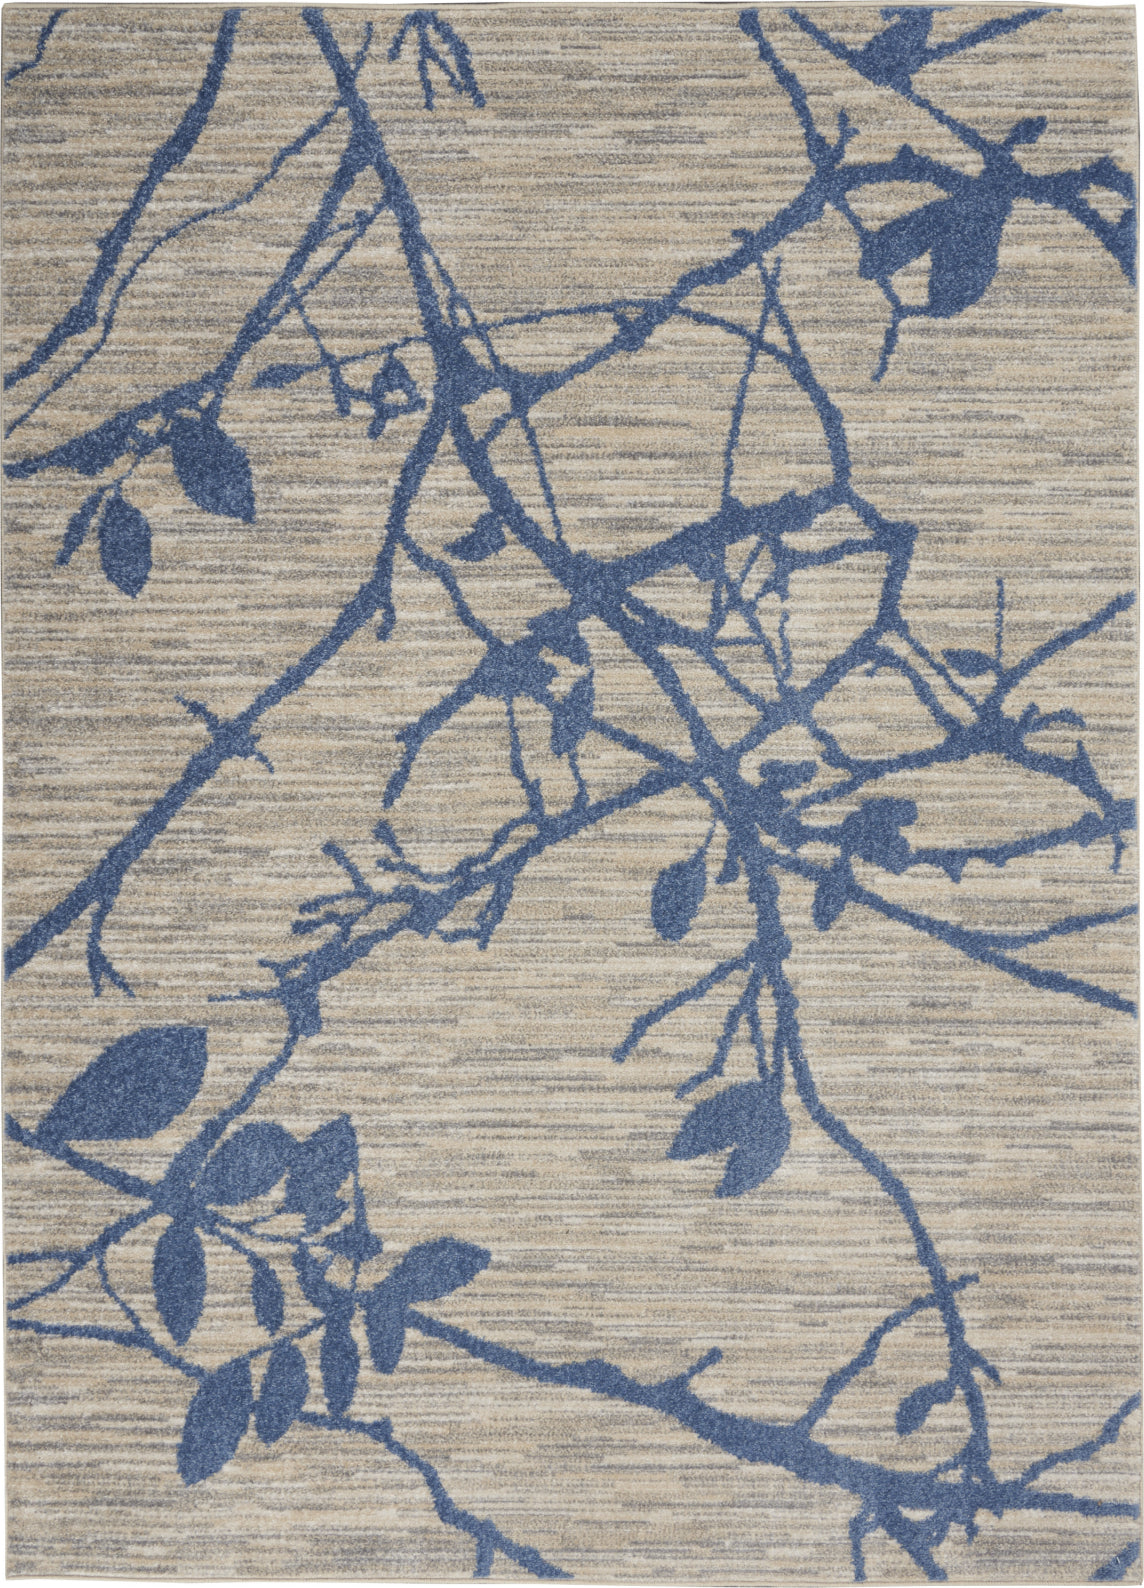 CK001 Klein – Calvin Area Blue and Flow Decor Teal/Ivory River Rugs Incredible Rug RFV02